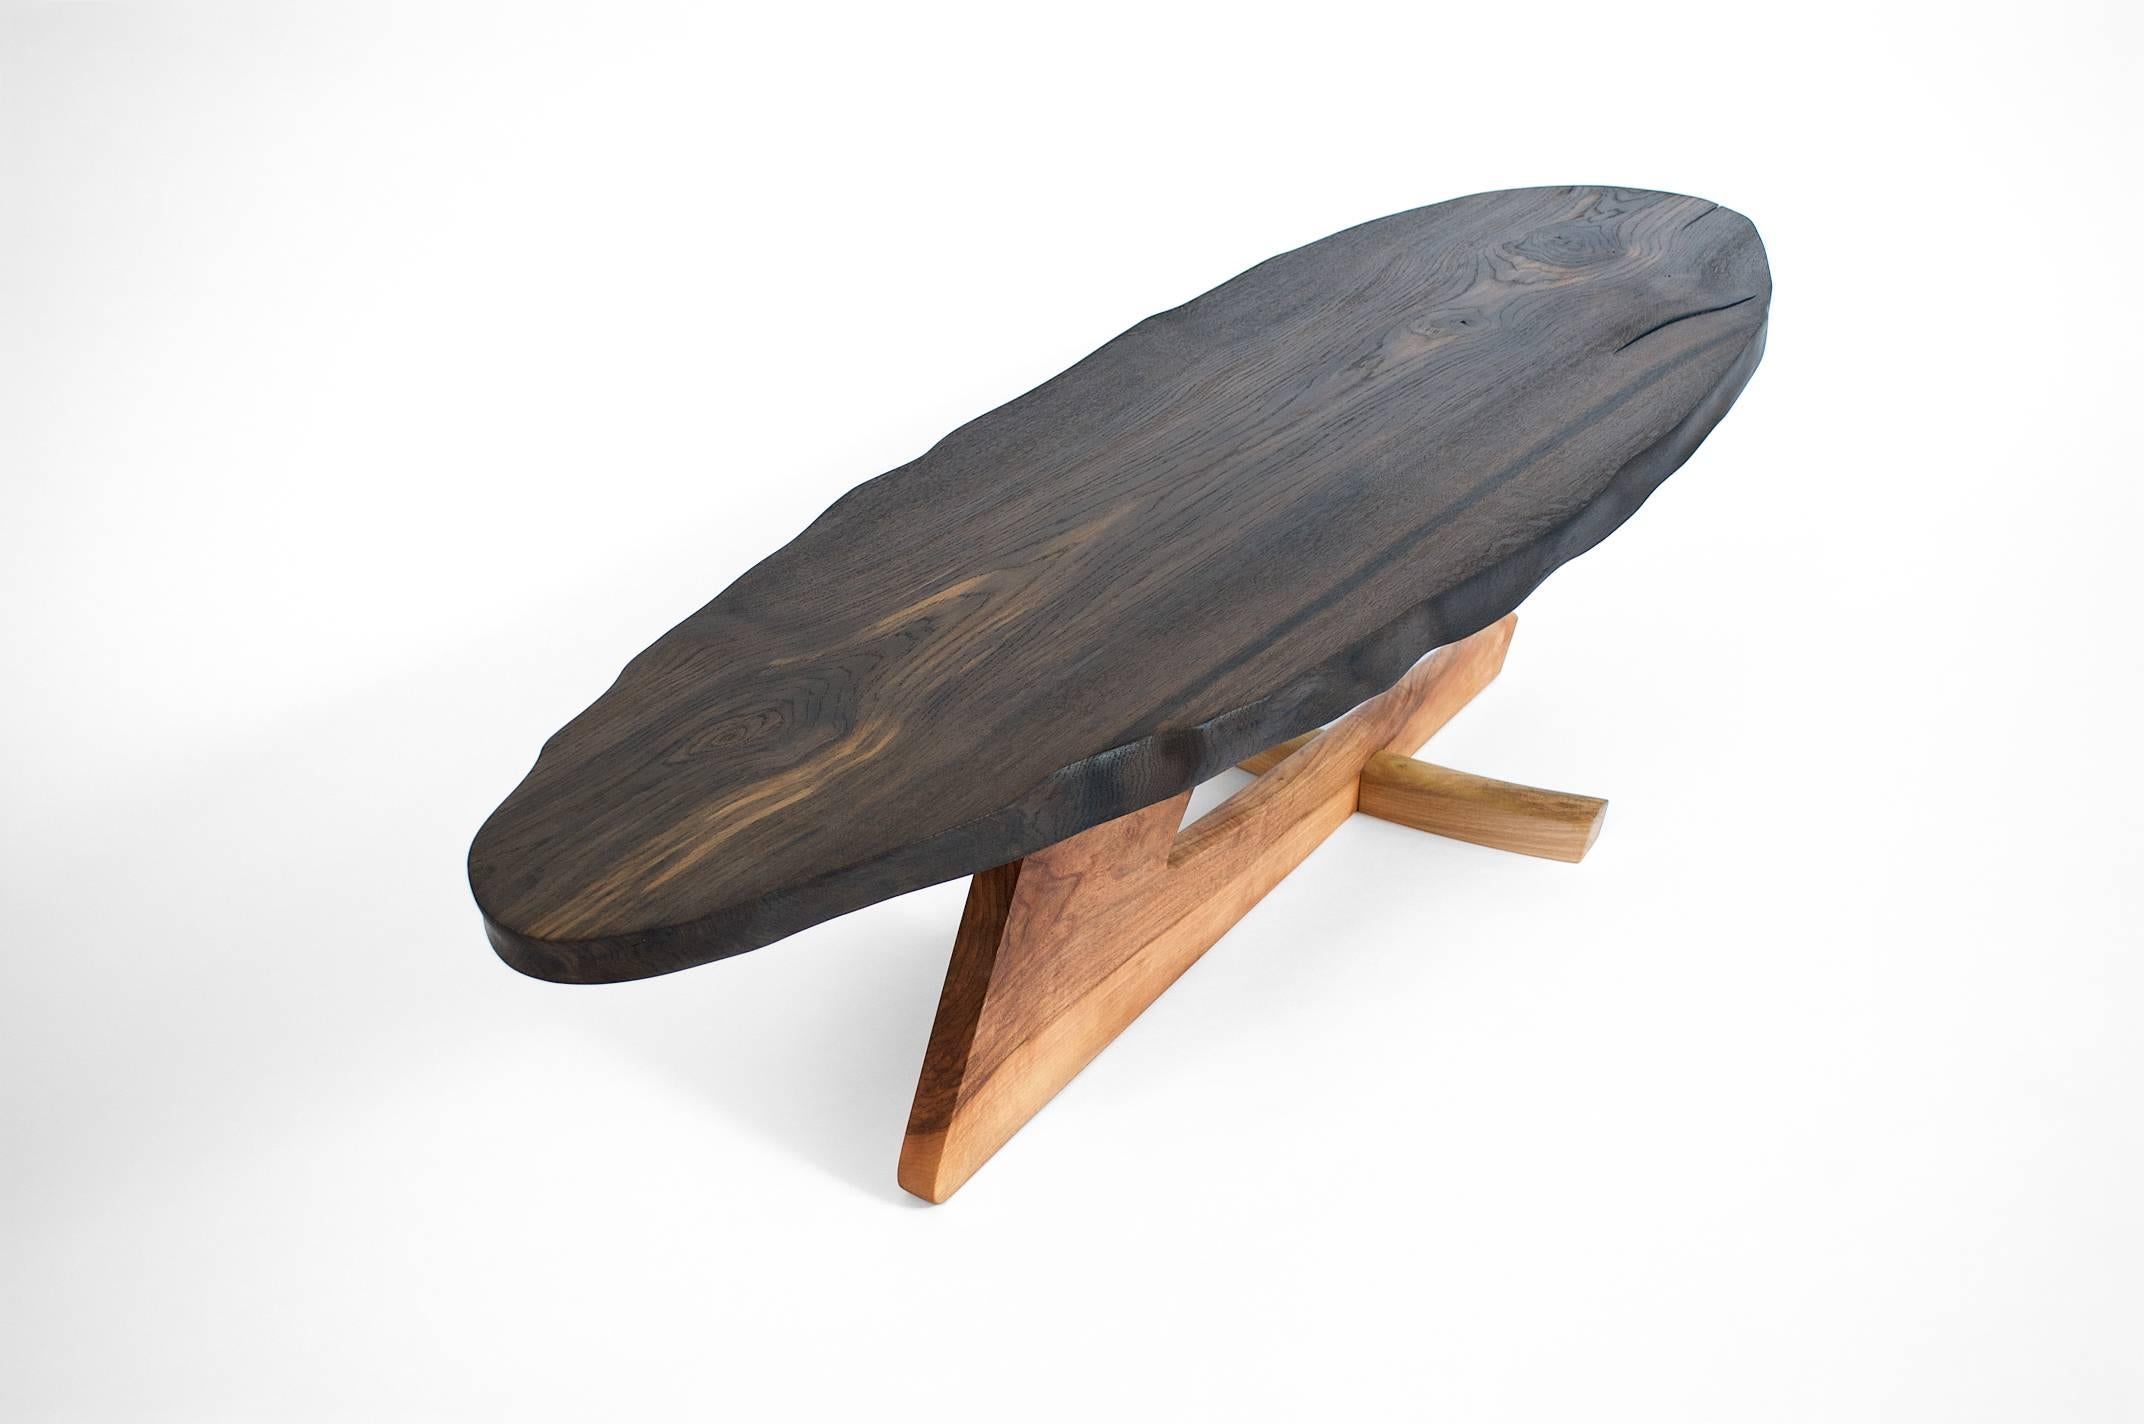 Unique signed table by Jörg Pietschmann
Table · Bog Oak, Europ. Walnut · T1385
Measures: H 38 x W 141 x D 43 cm tabletop 3.5 cm
tabletop made of black old bog oak, on specially designed feet made from walnut.
Polished oil finish.


In